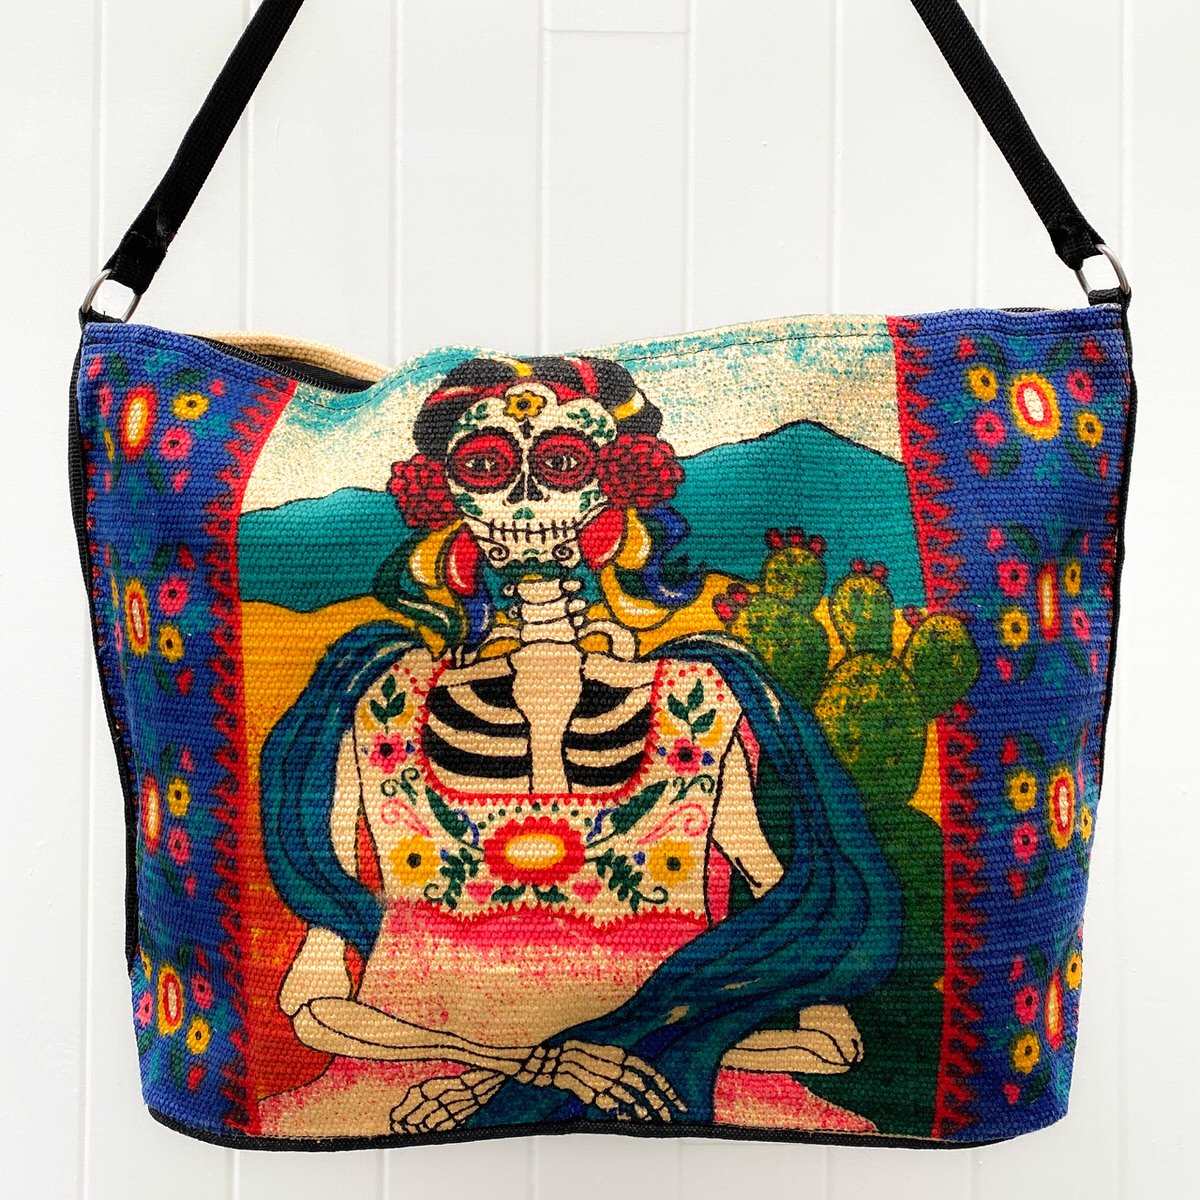 Day of the Dead Frida Kahlo skeleton with cactus design silkscreened in bright blues, red, pink, green and yellow on cotton handbag  with black cotton strap